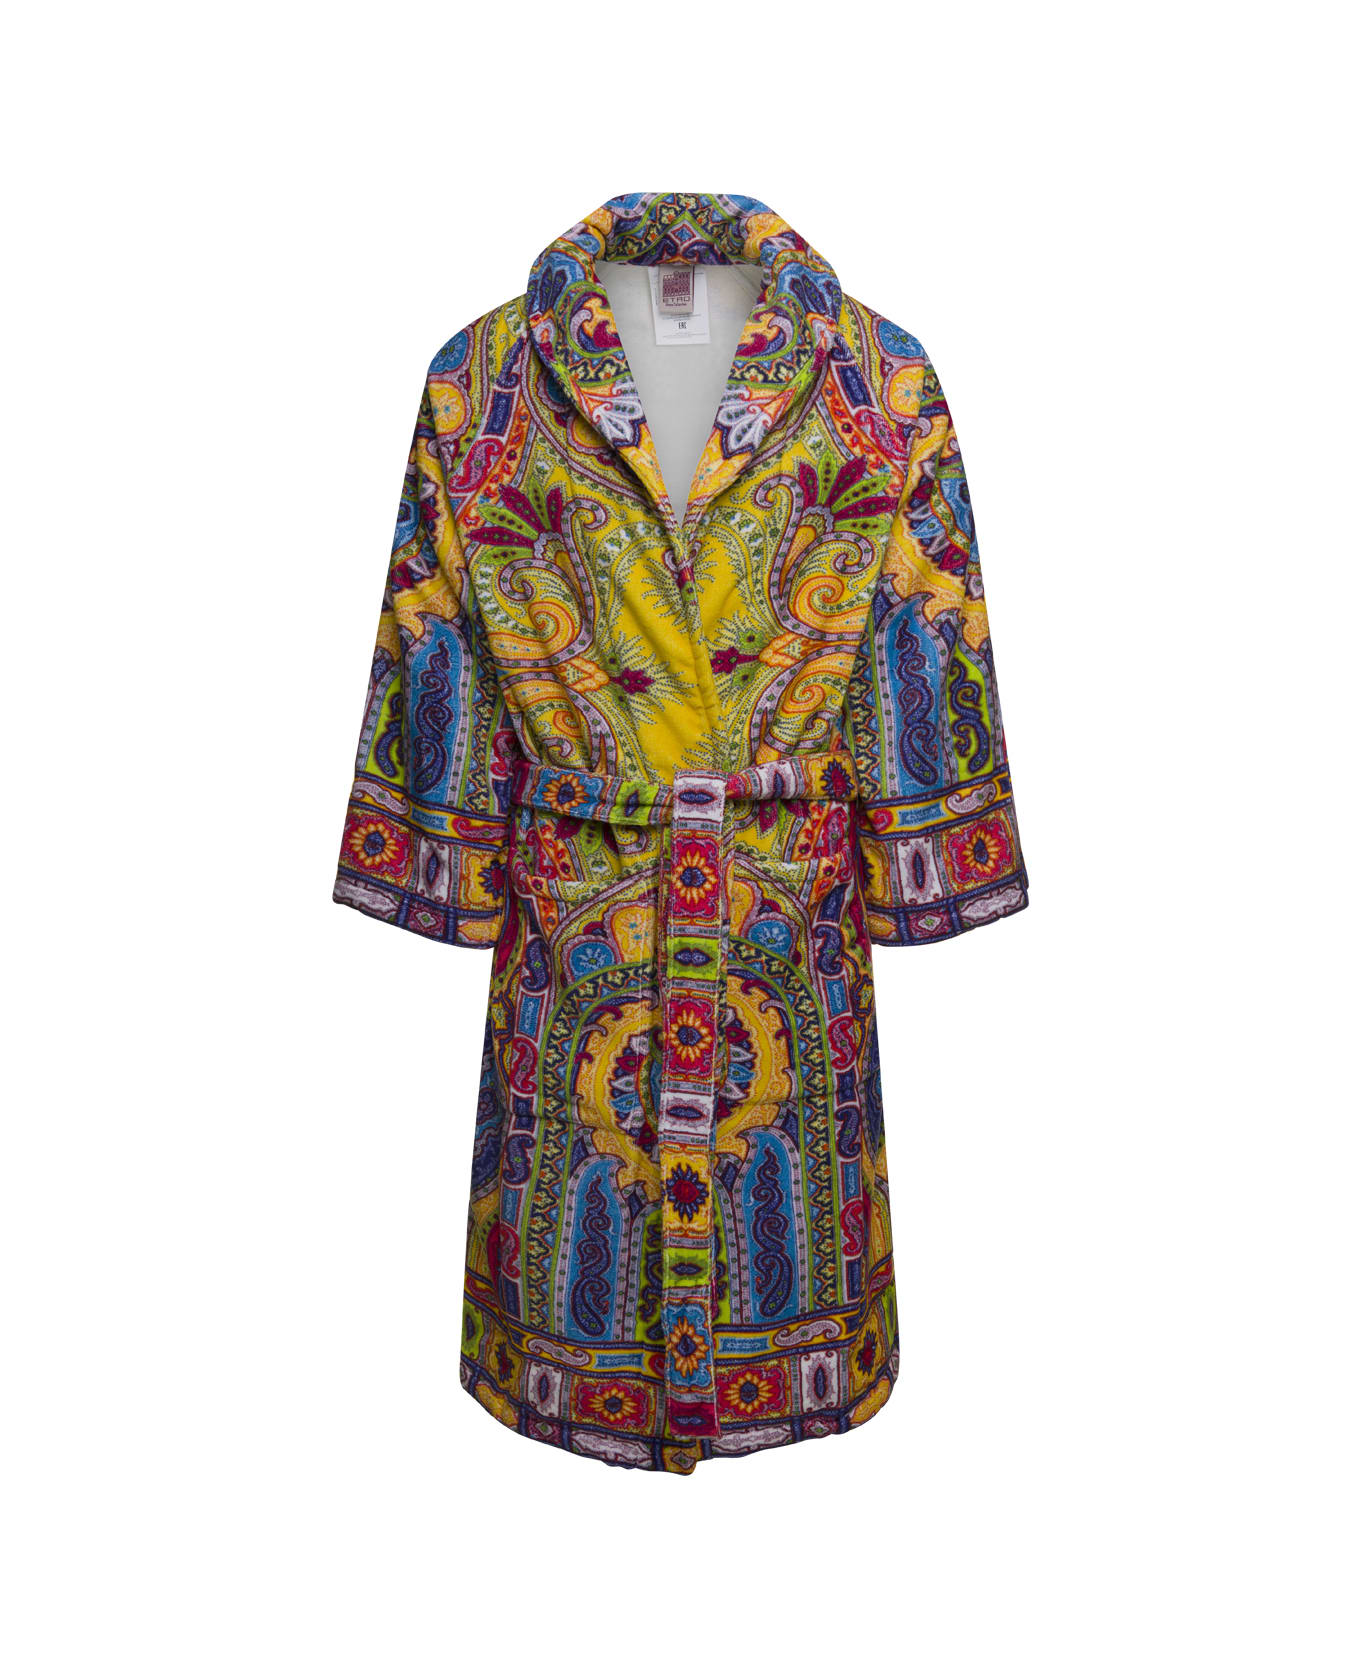 Etro 'new Tradition' Multicolor Bath Robe With Pailsey Motif Home - Yellow タオル